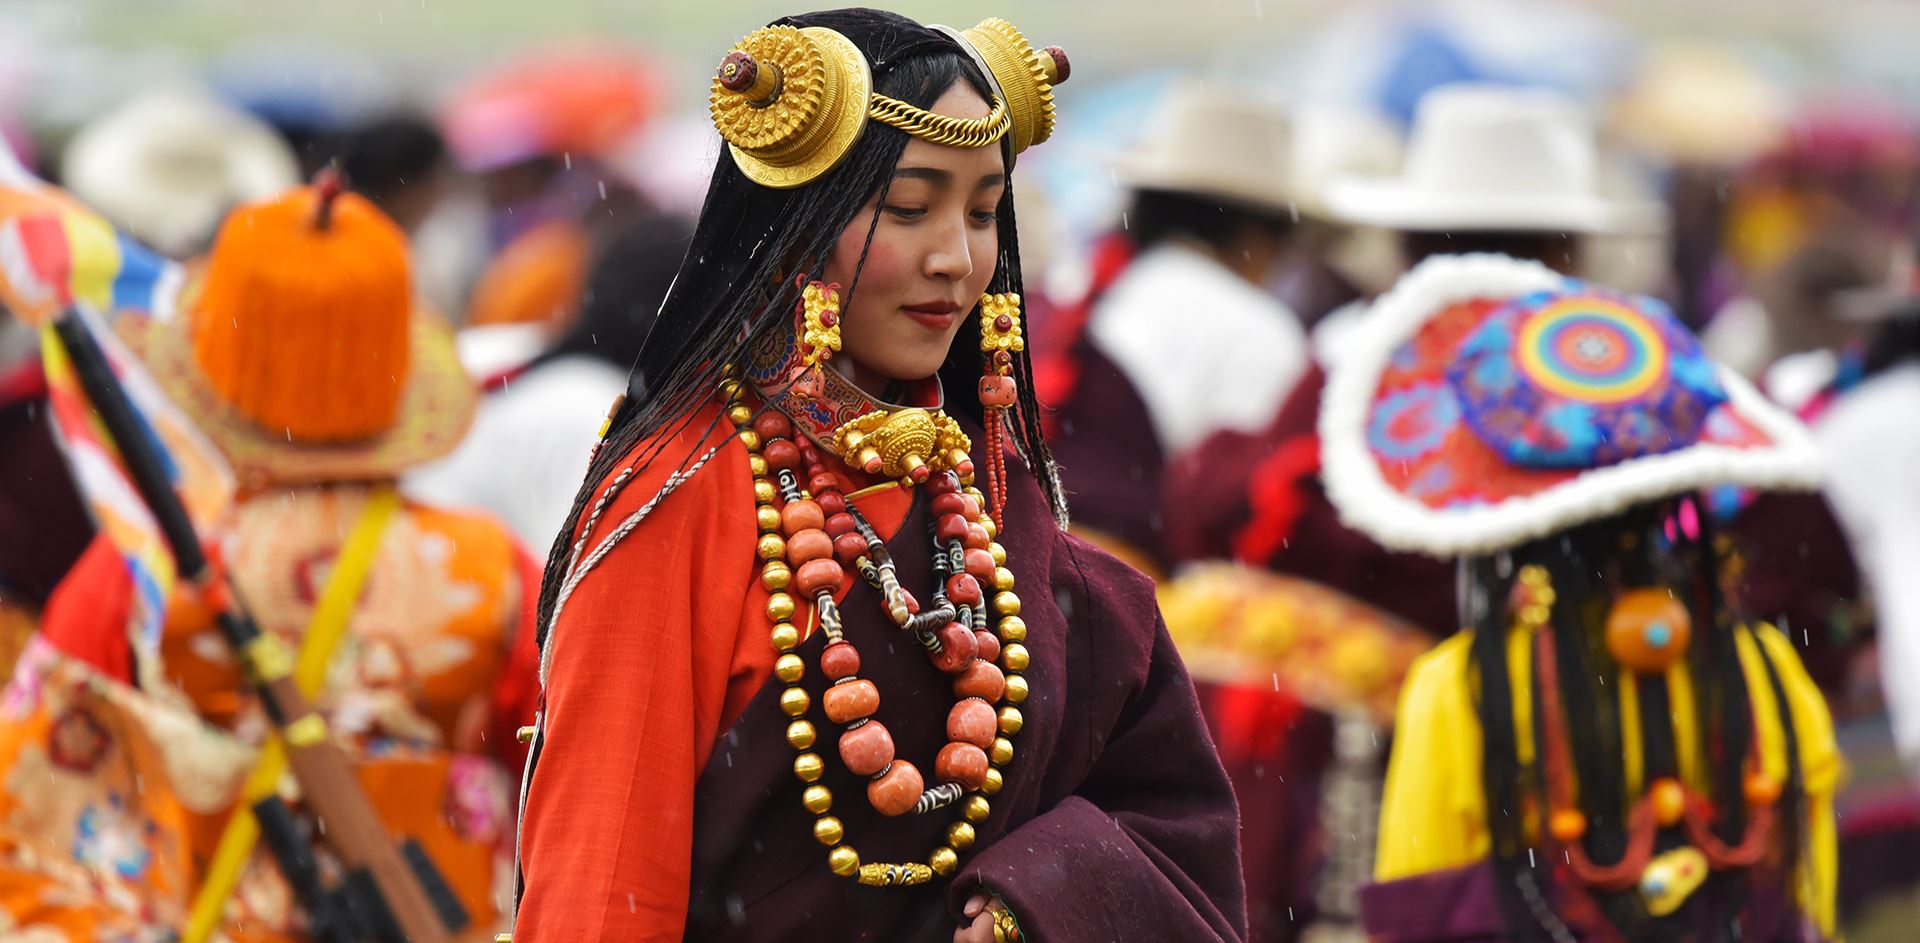 Experience Tagong Mask Dance Festival and Litang Horse Racing Festival 2021